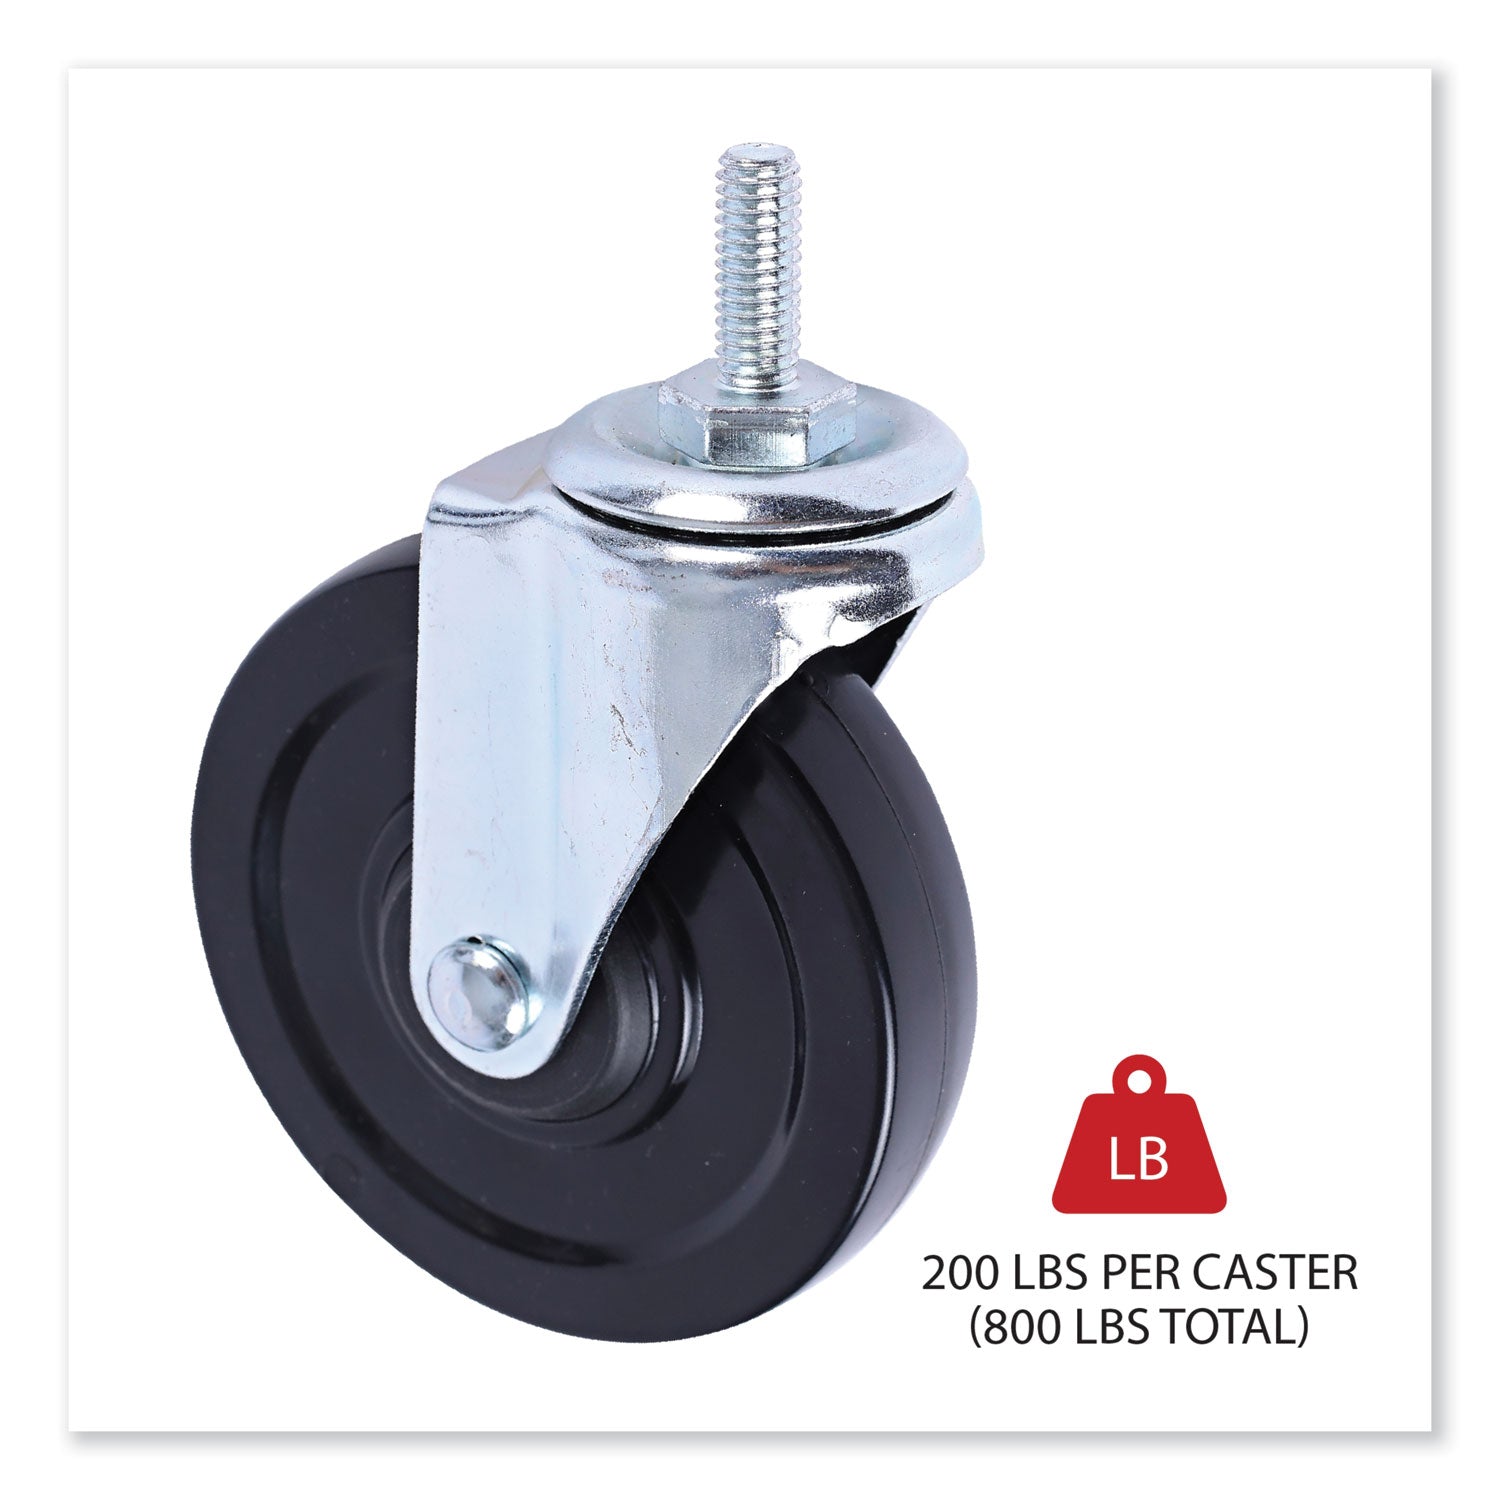 optional-casters-for-wire-shelving-grip-ring-type-k-stem-4-wheel-black-silver-4-set-2-locking_alesw690004 - 2